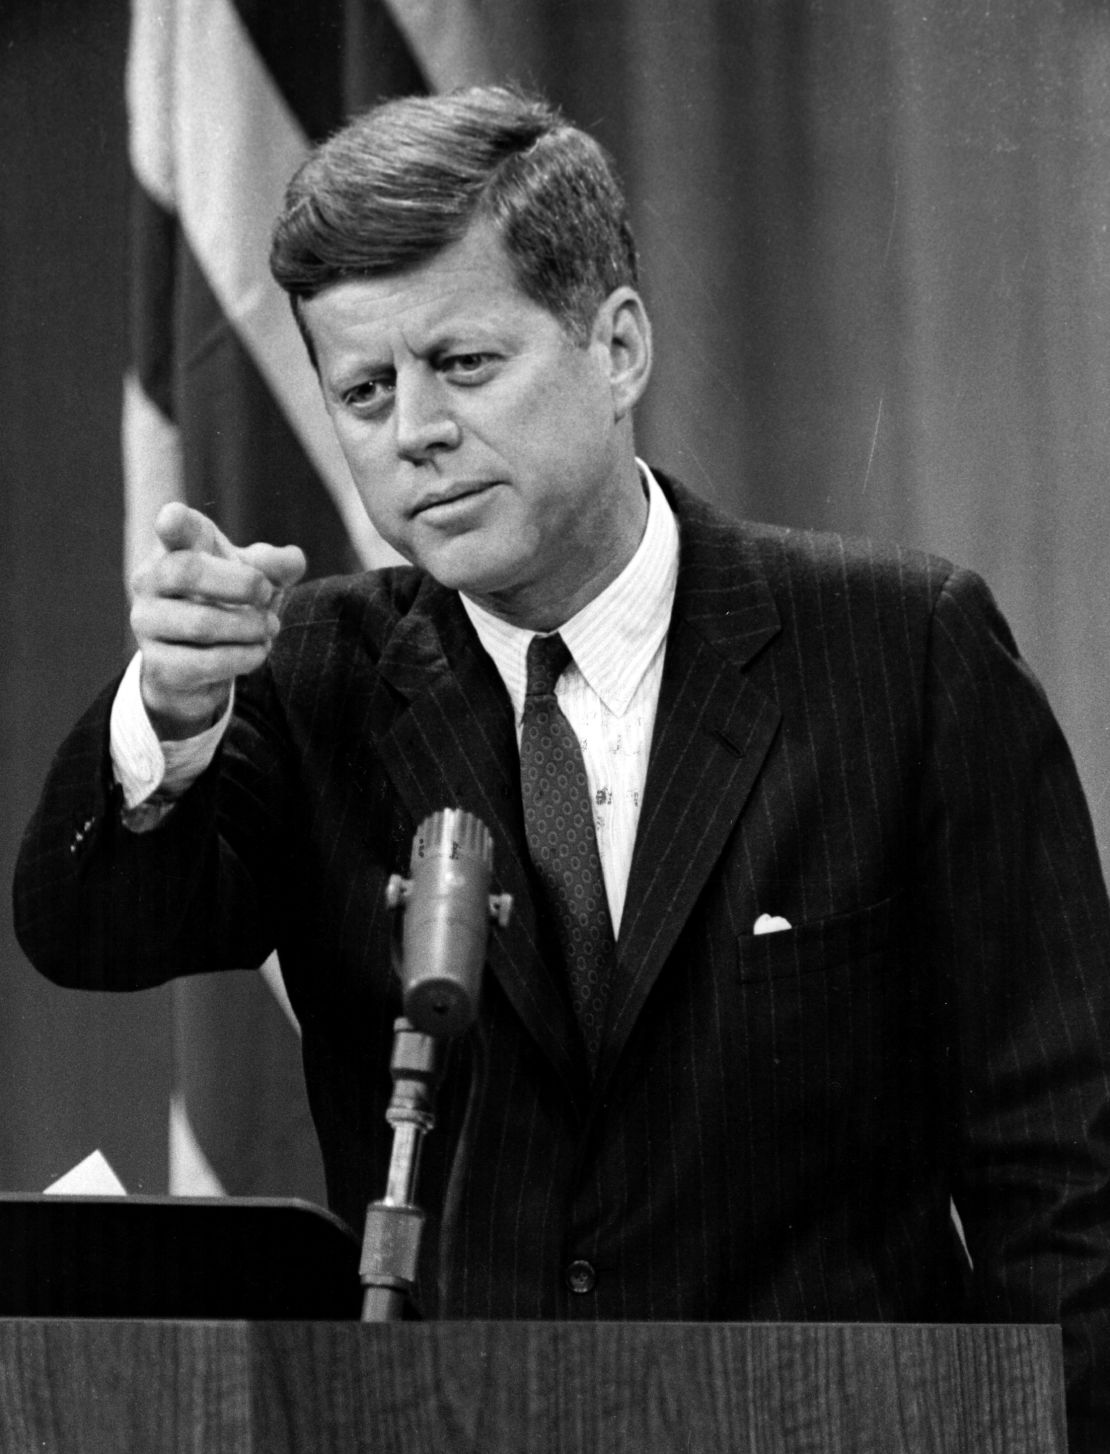 John F. Kennedy was known for his wit and one-liners, often used self-deprecatingly.